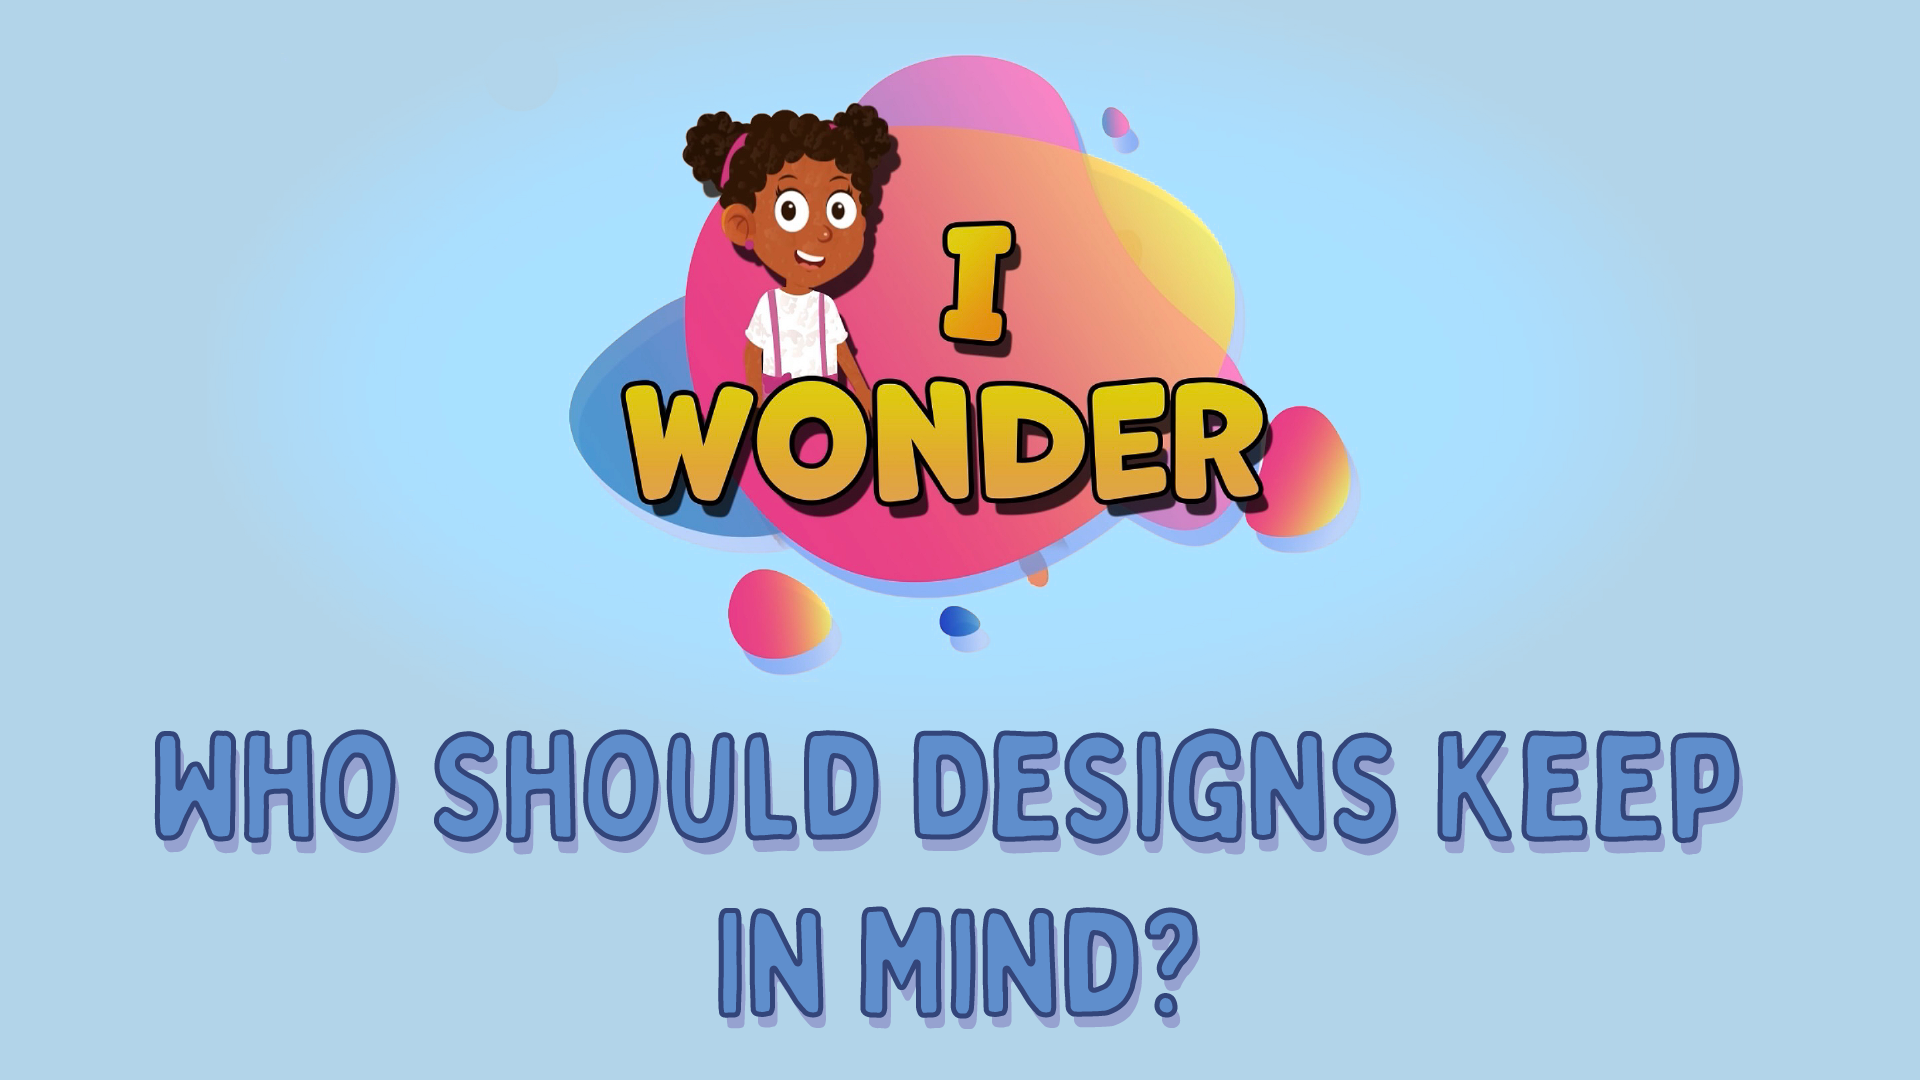 Who Should Designs Keep In Mind?